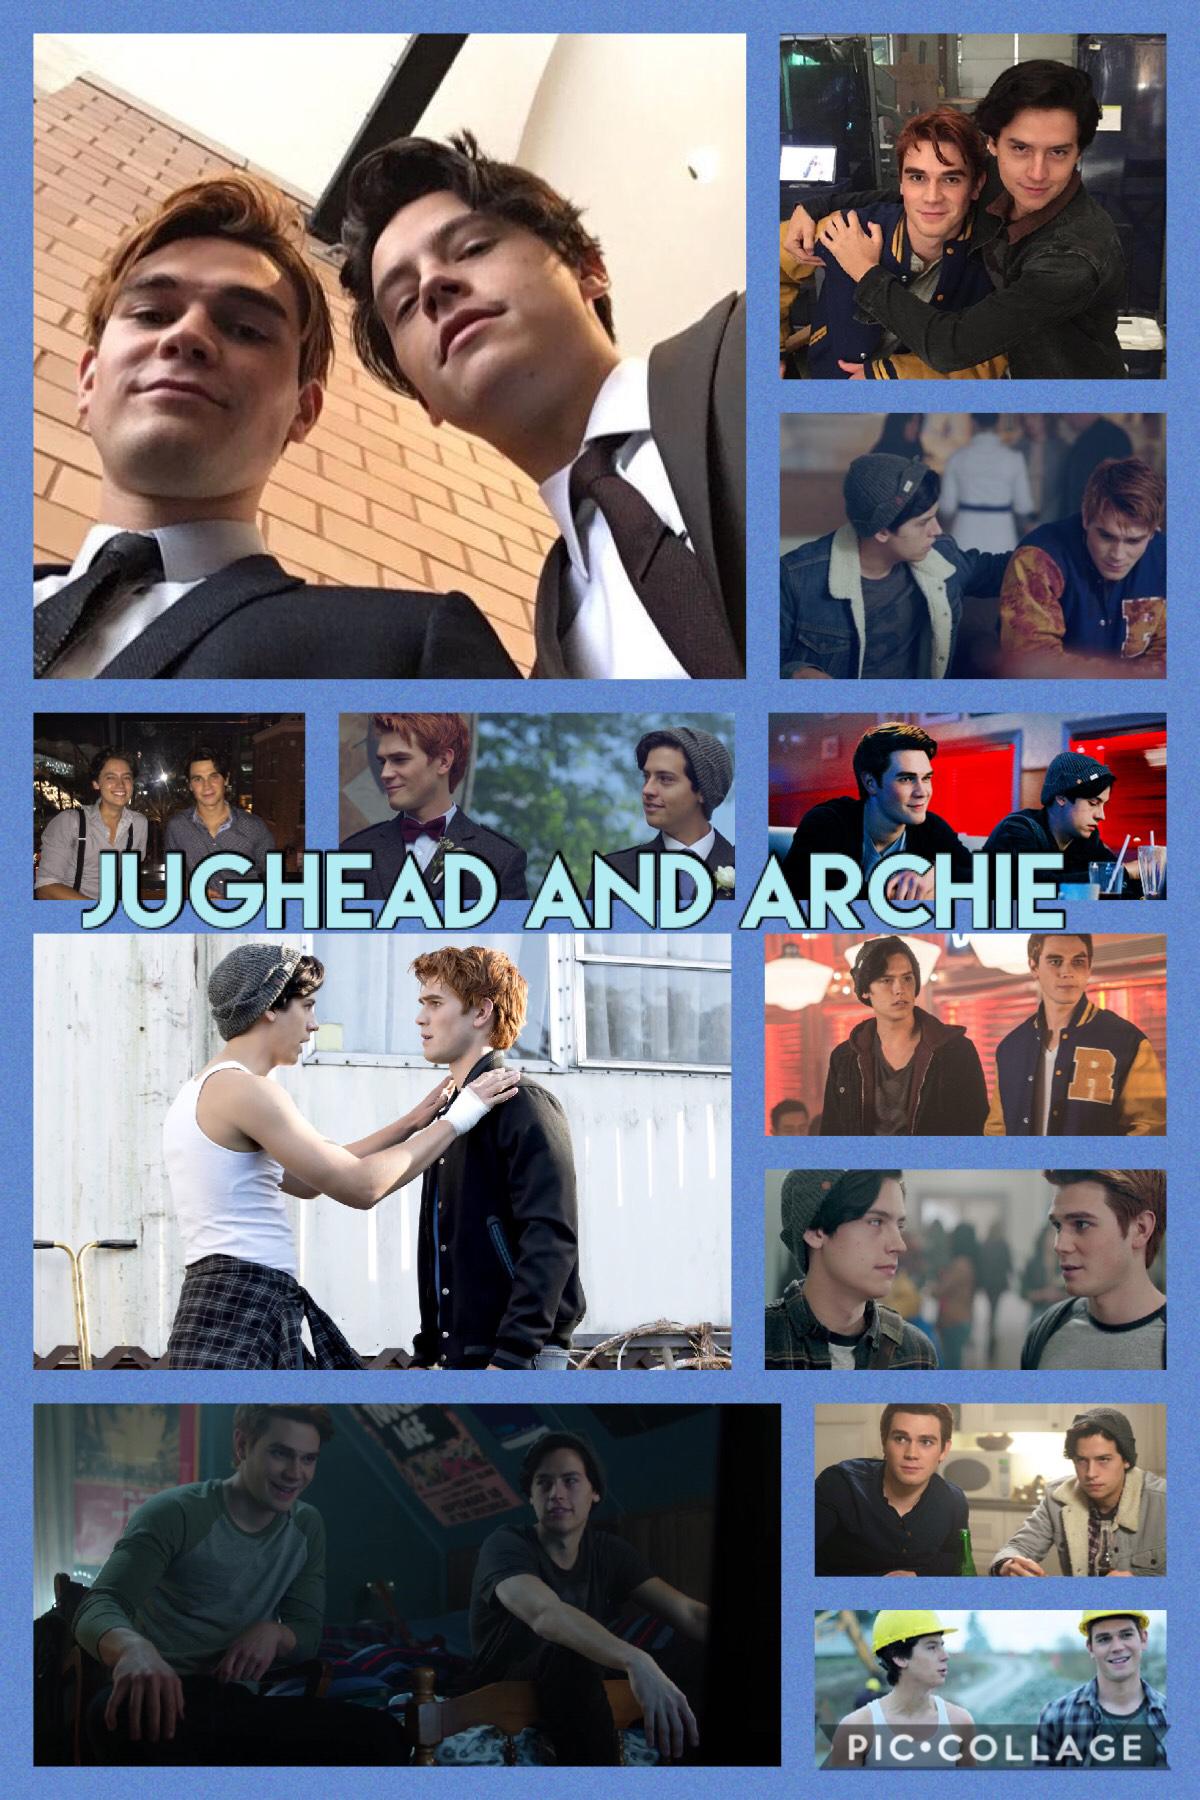 Jughead and Archie riverdale Collage 